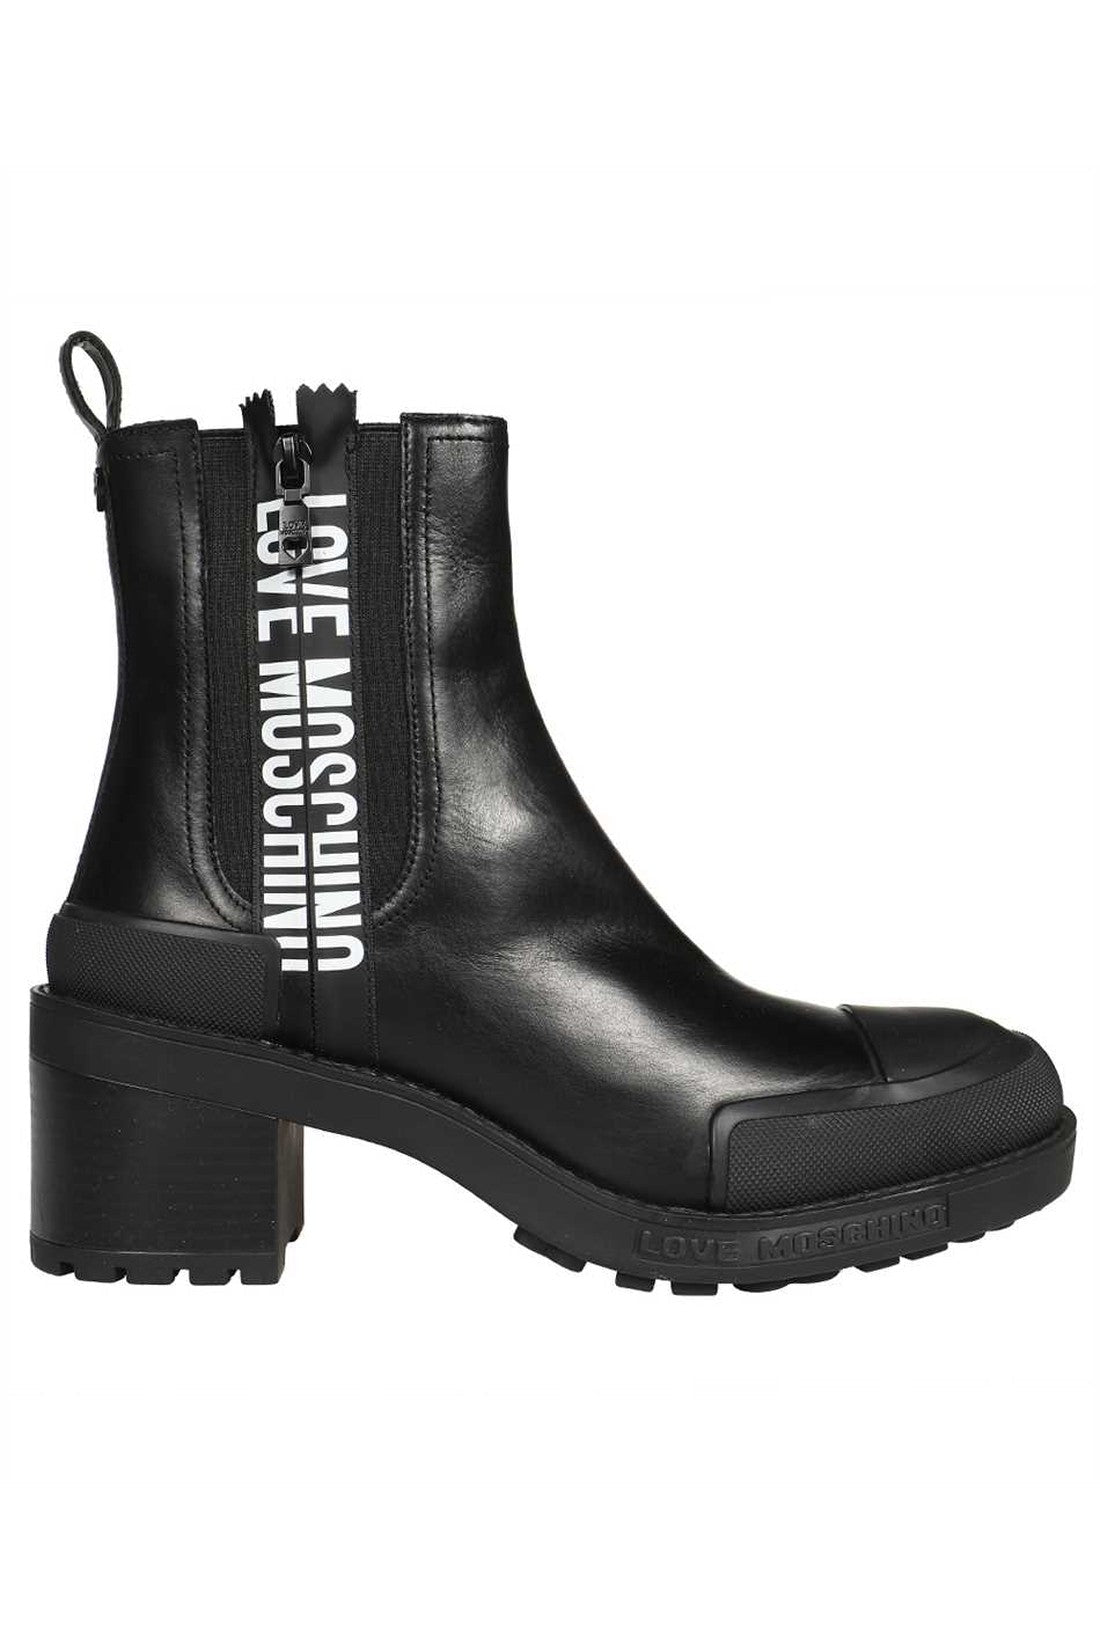 Leather ankle boots-Love Moschino-OUTLET-SALE-35-ARCHIVIST